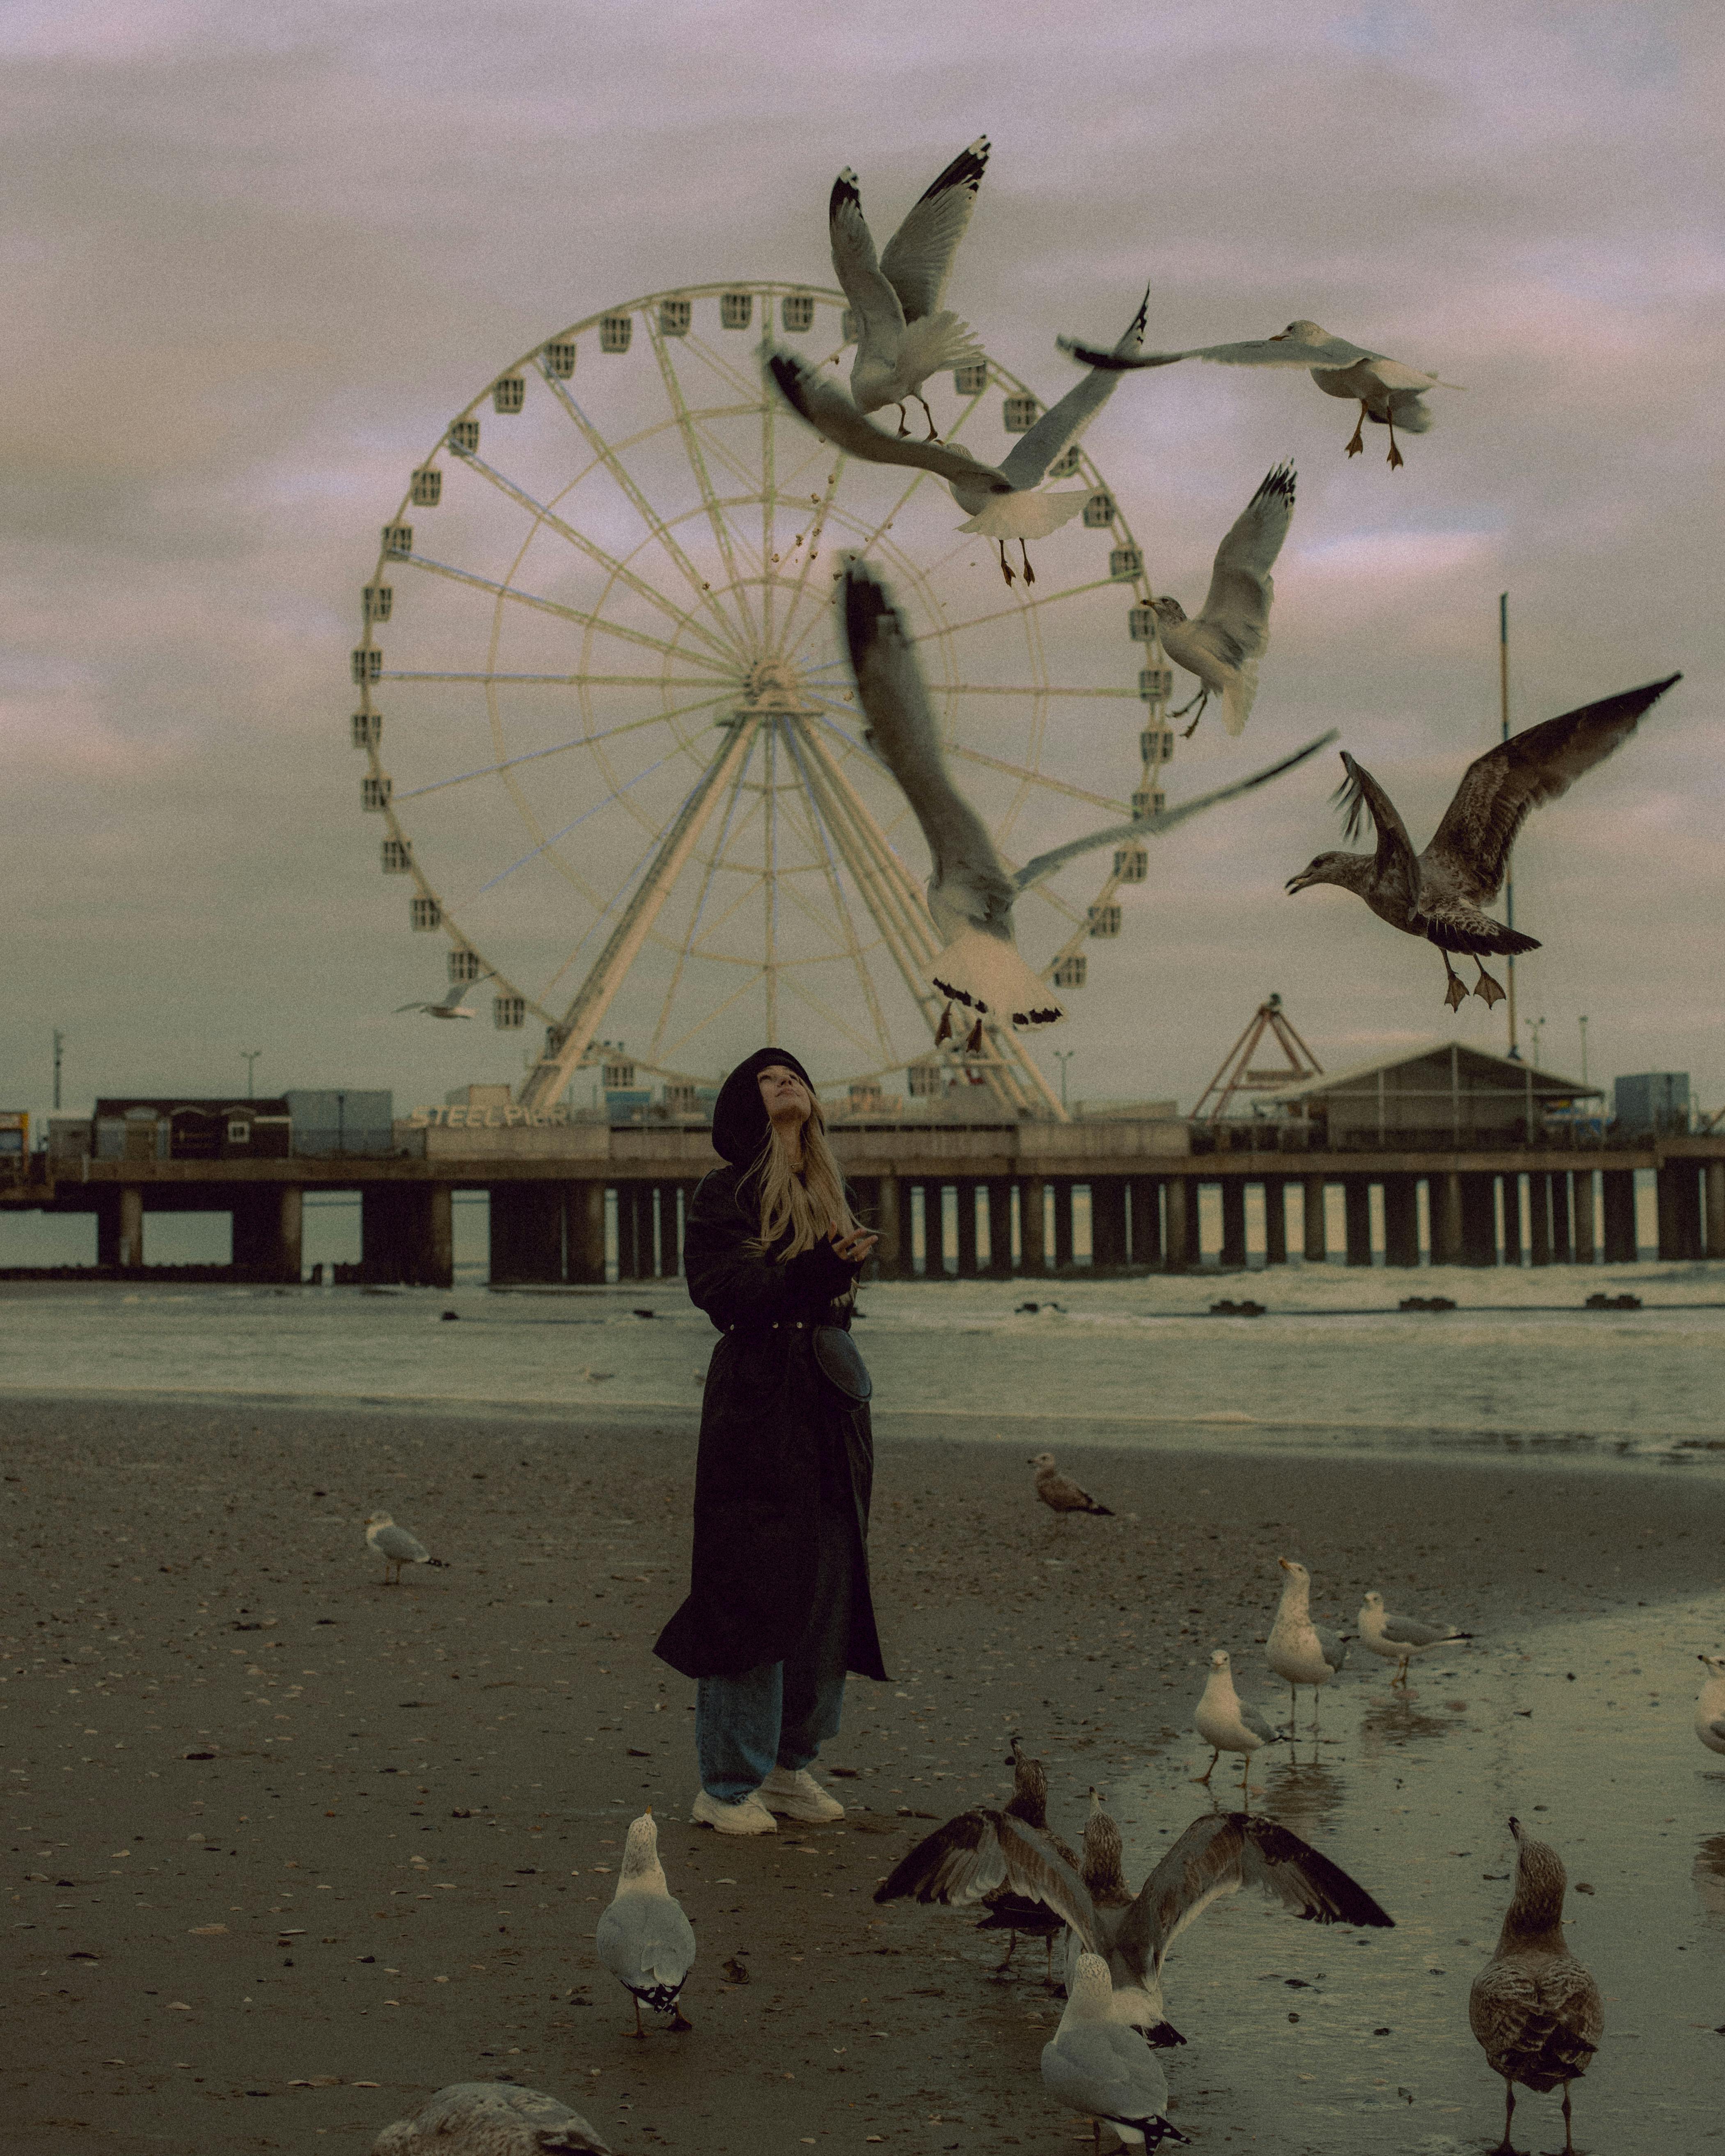 tourist feeding seagulls on the beach with a steel pier amusement park in the background